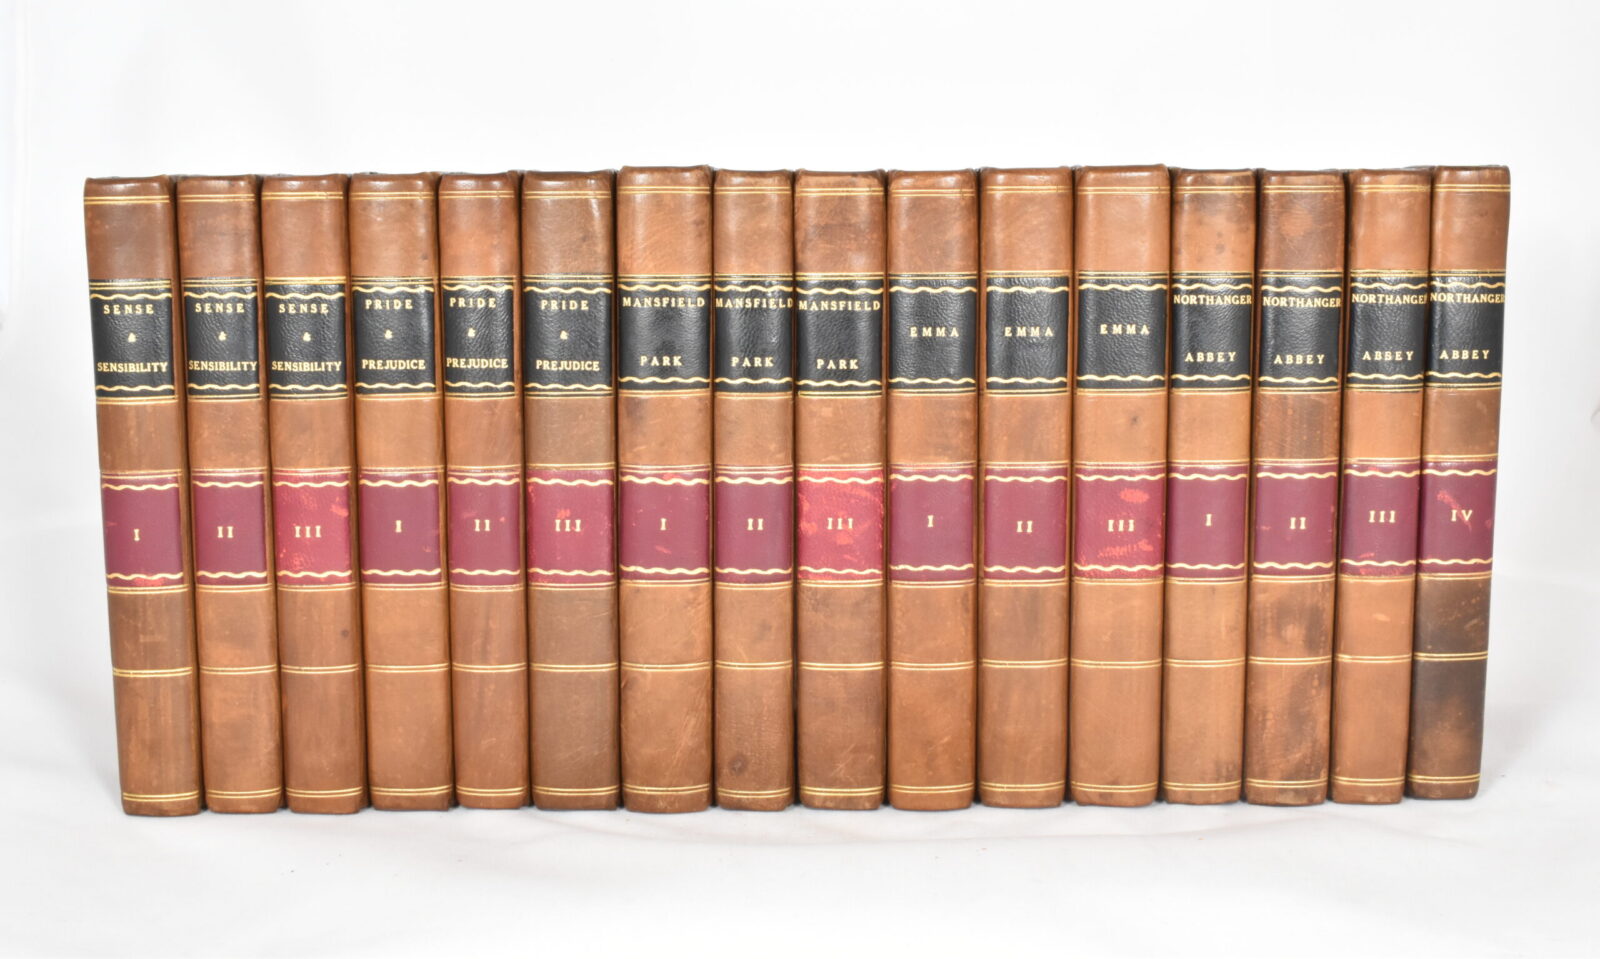 A full set of Jane Austen first editions